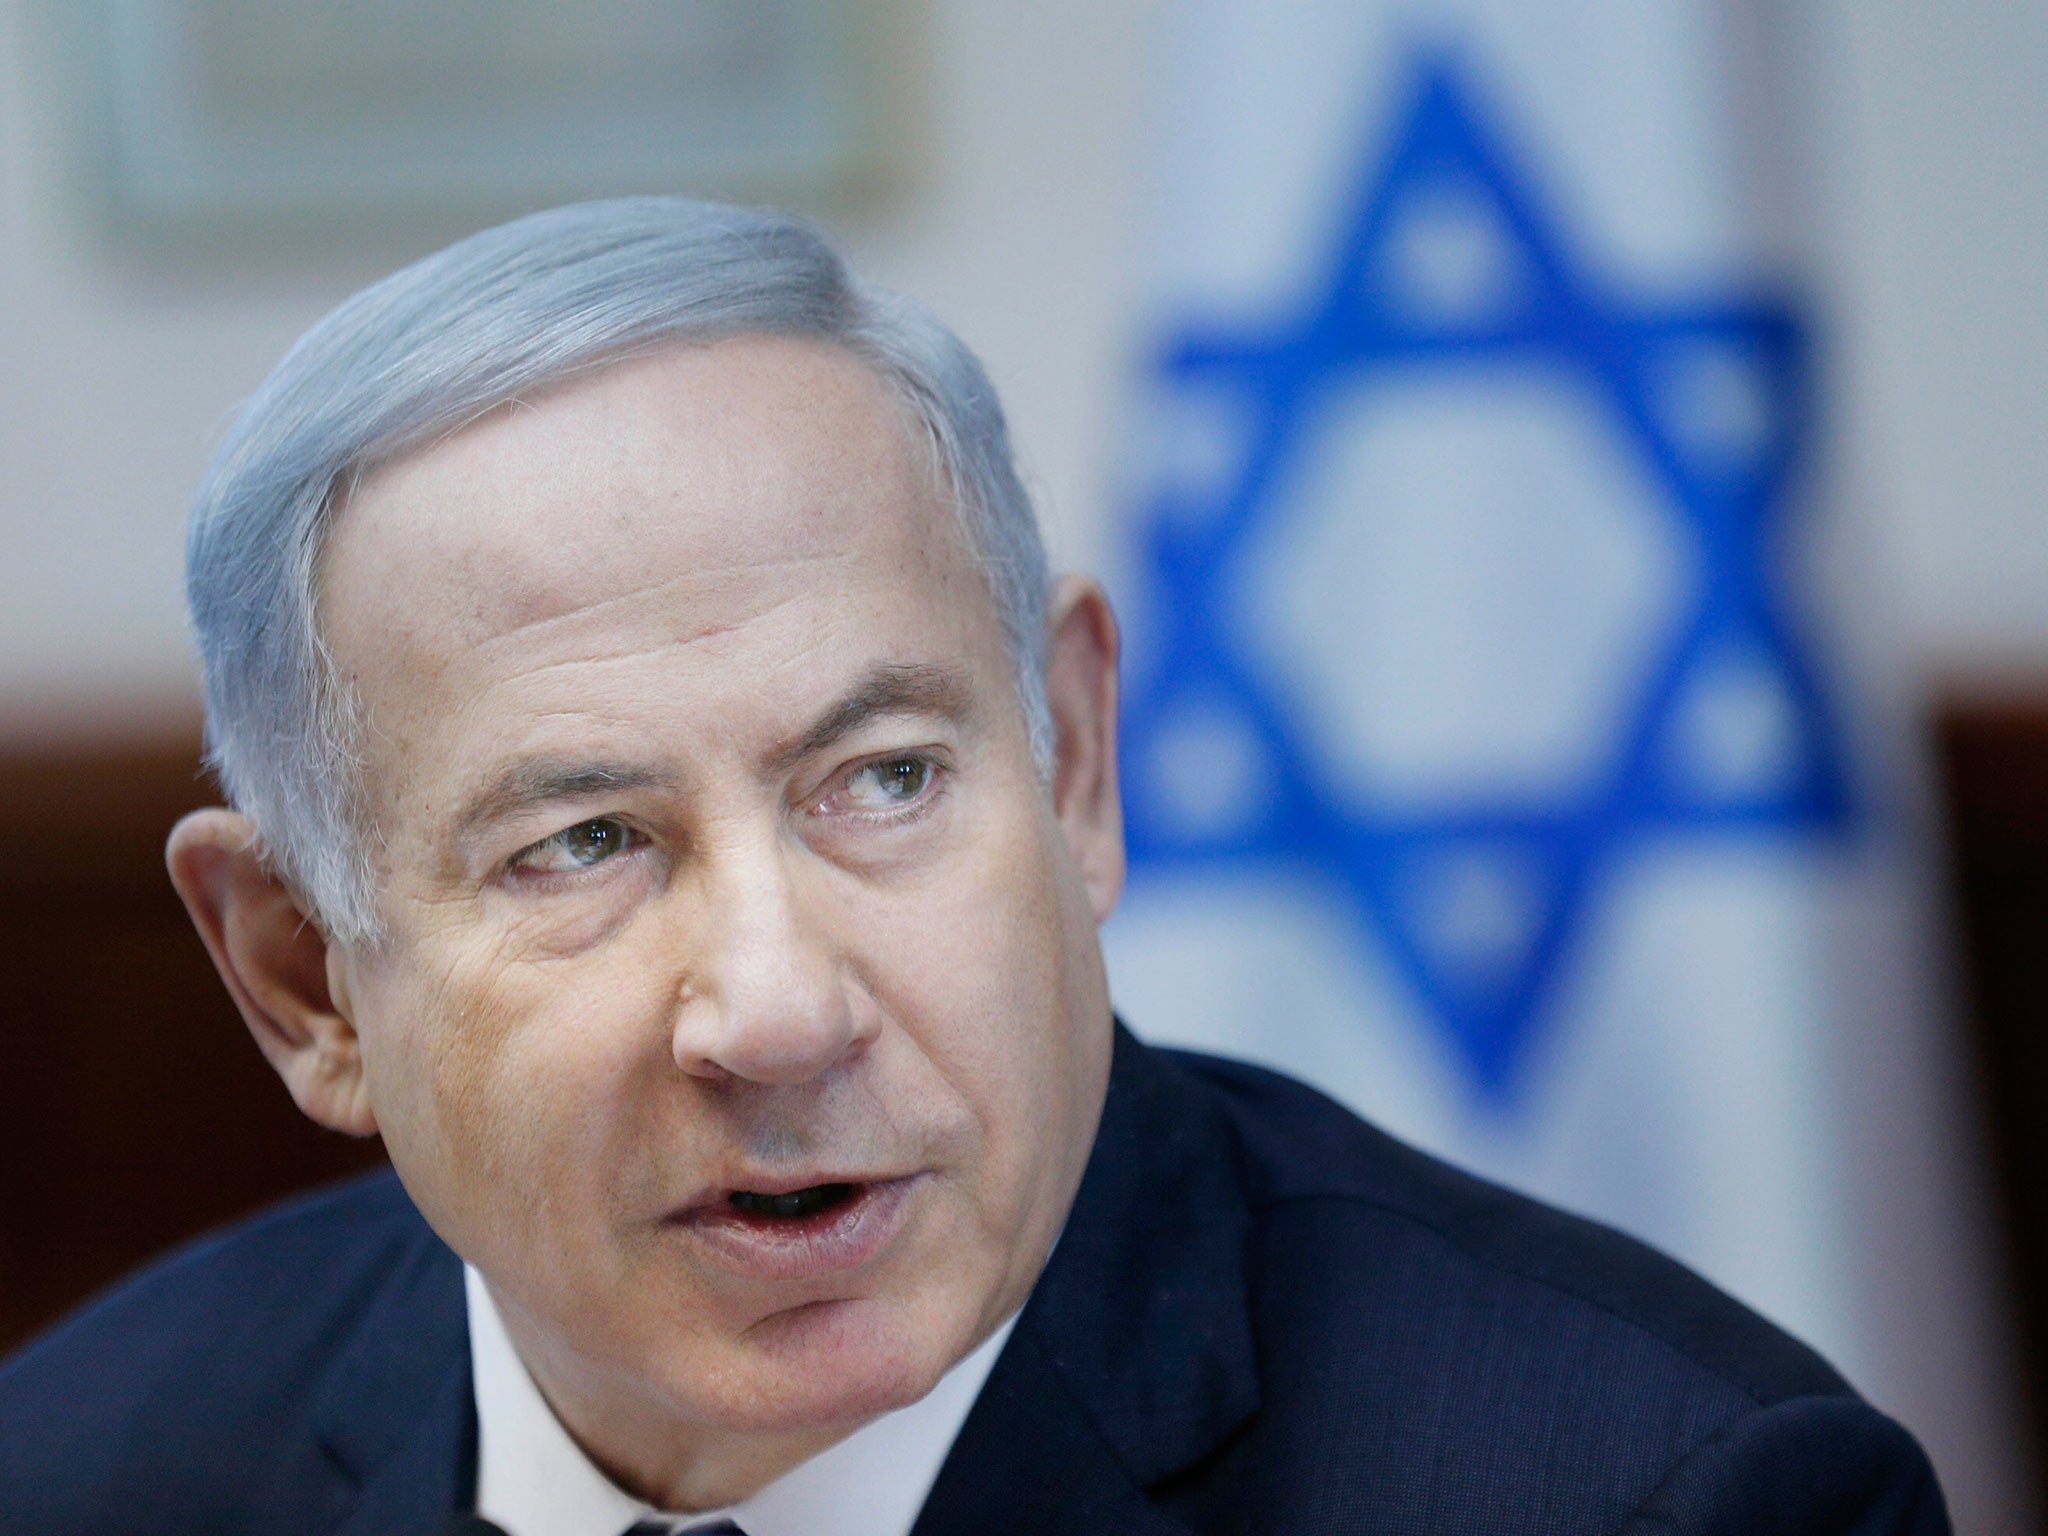 Israeli Prime Minister Benjamin Netanyahu has denied all wrongdoing and told political opponents not to 'celebrate his downfall' yet